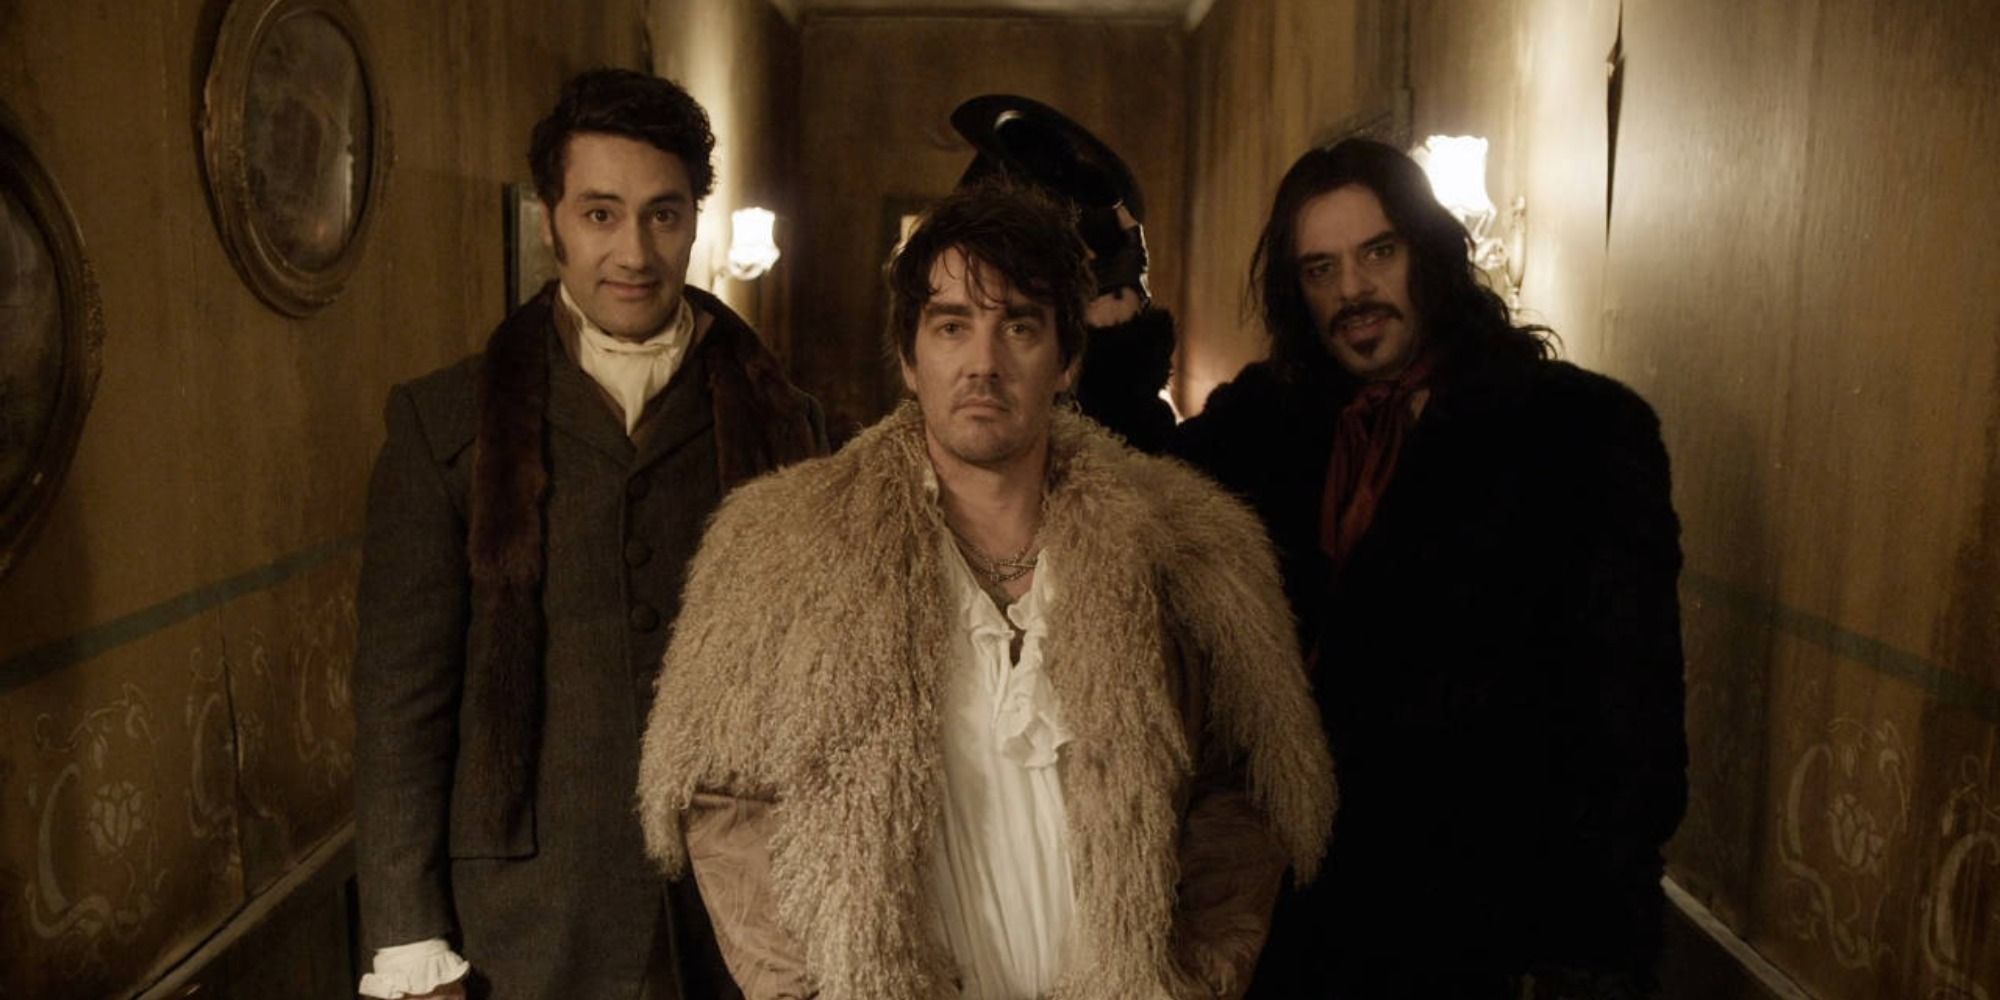 Taika Waititi, Jemaine Clement and Jonathan Brugh in What We Do in the Shadows